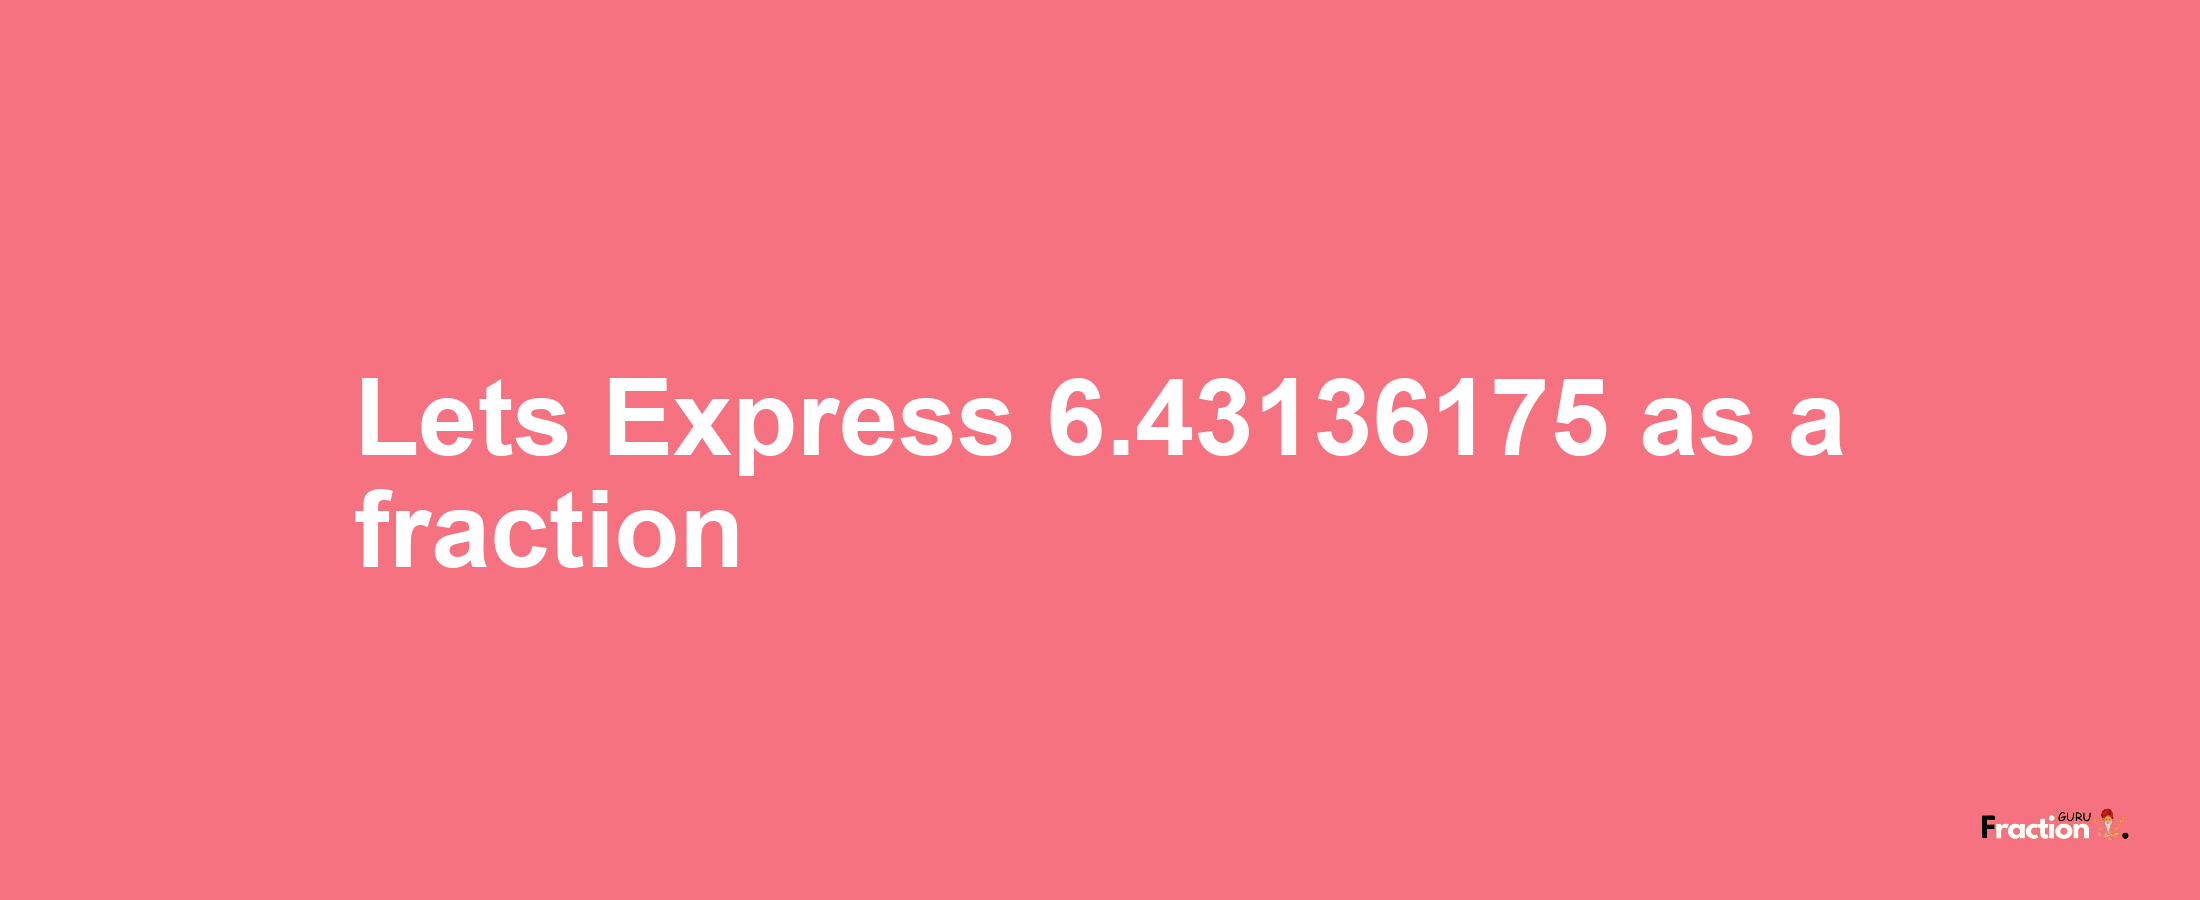 Lets Express 6.43136175 as afraction